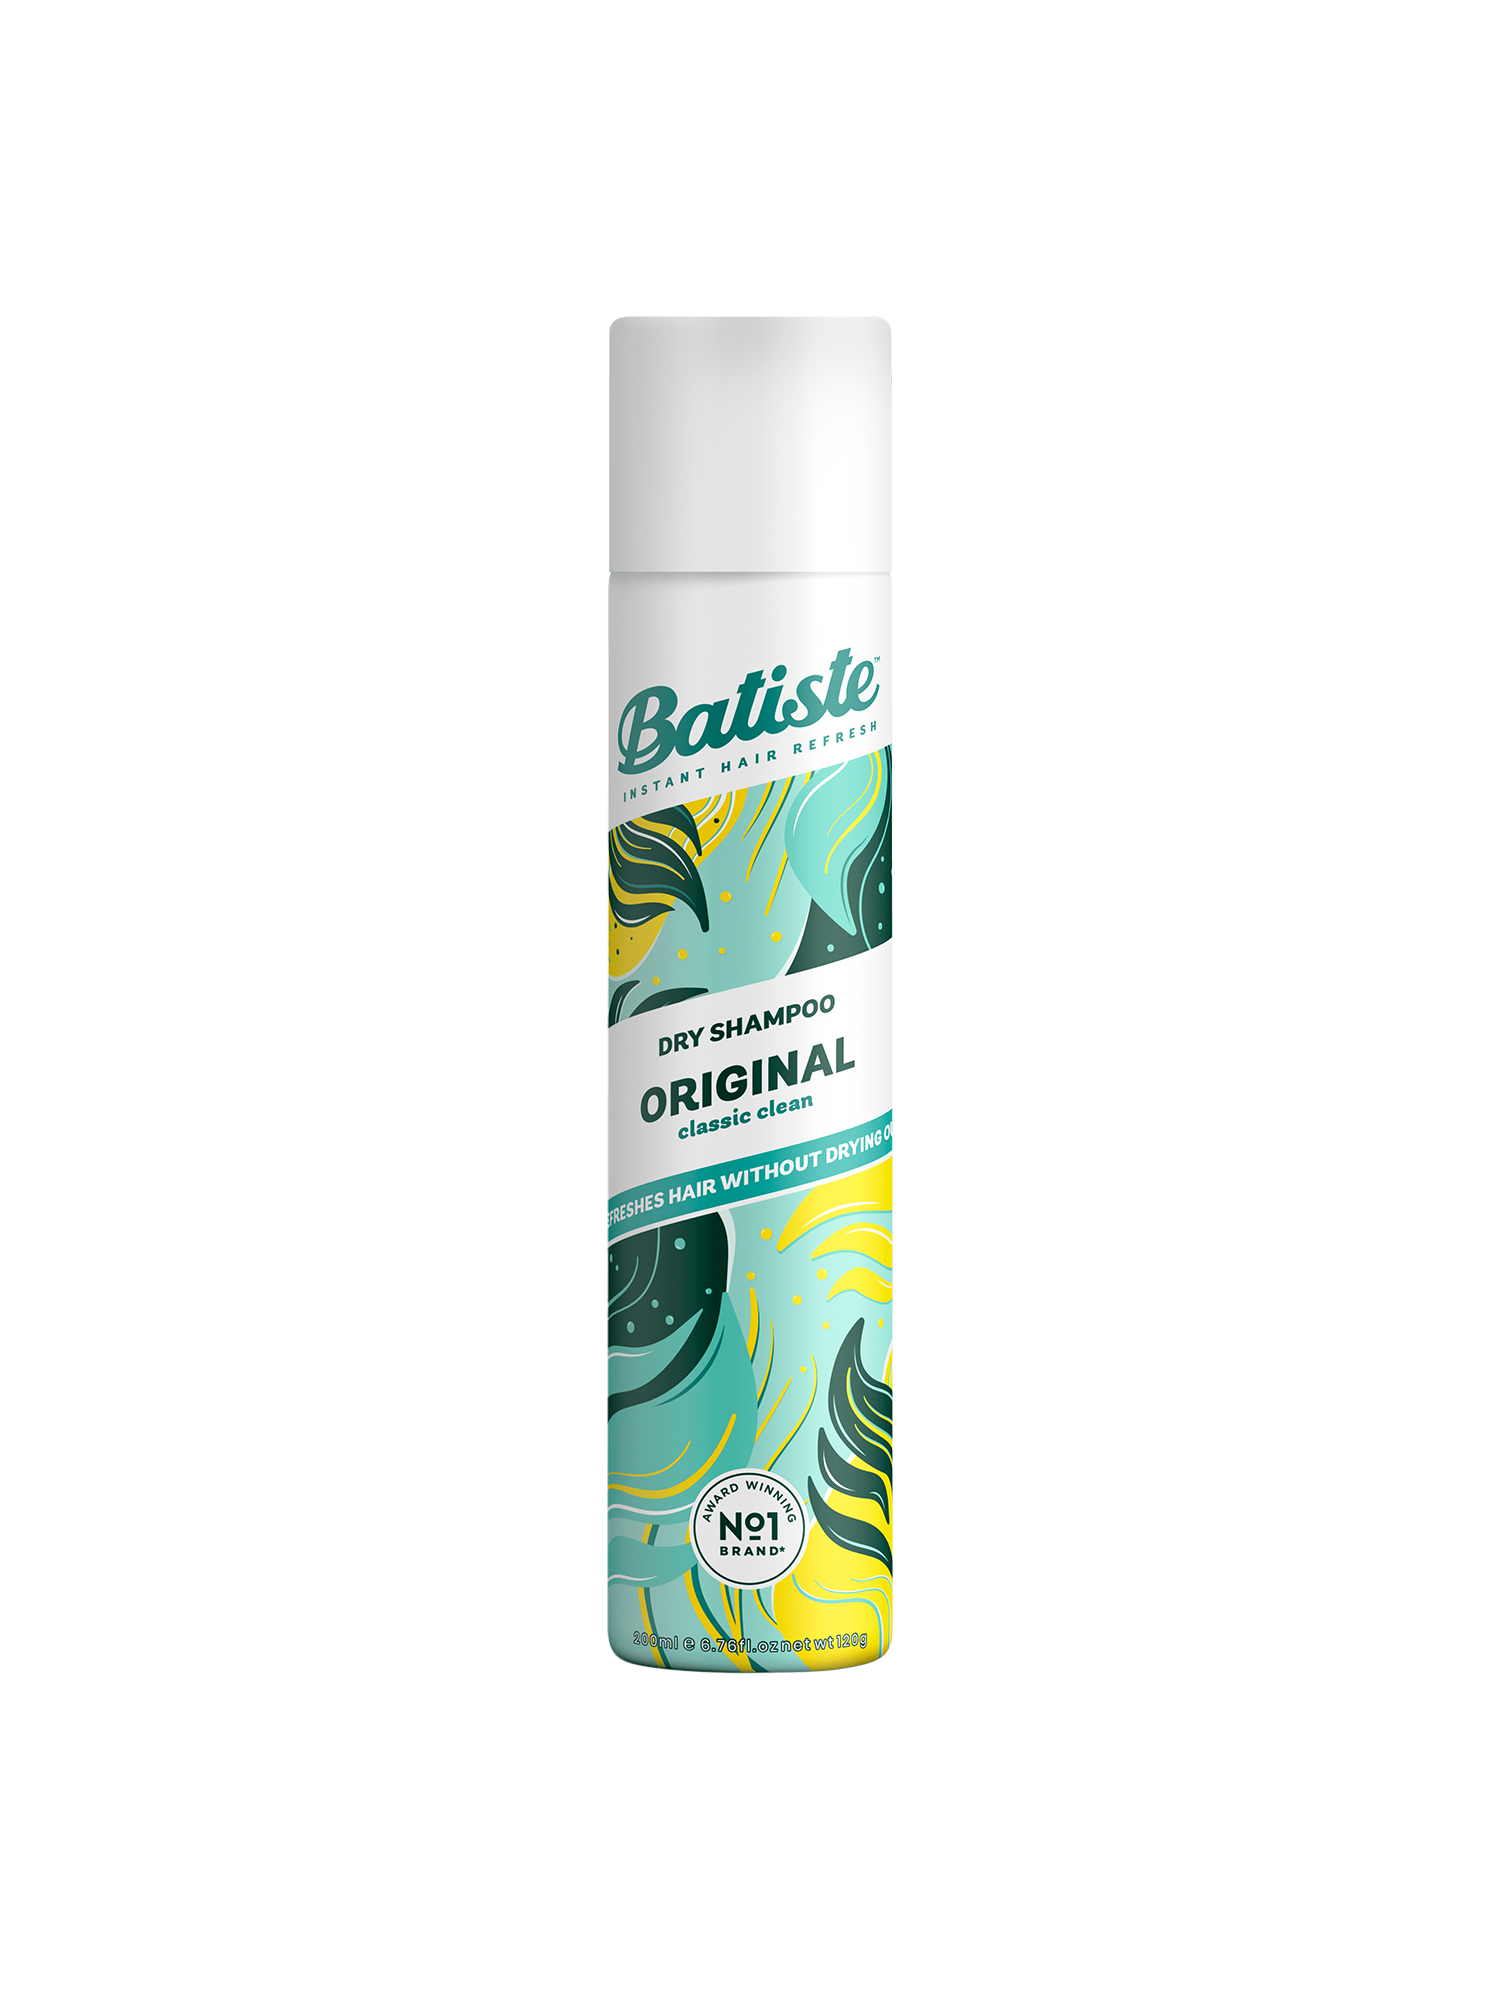 15 Best Dry Shampoo - Top Dry Shampoos In The UK